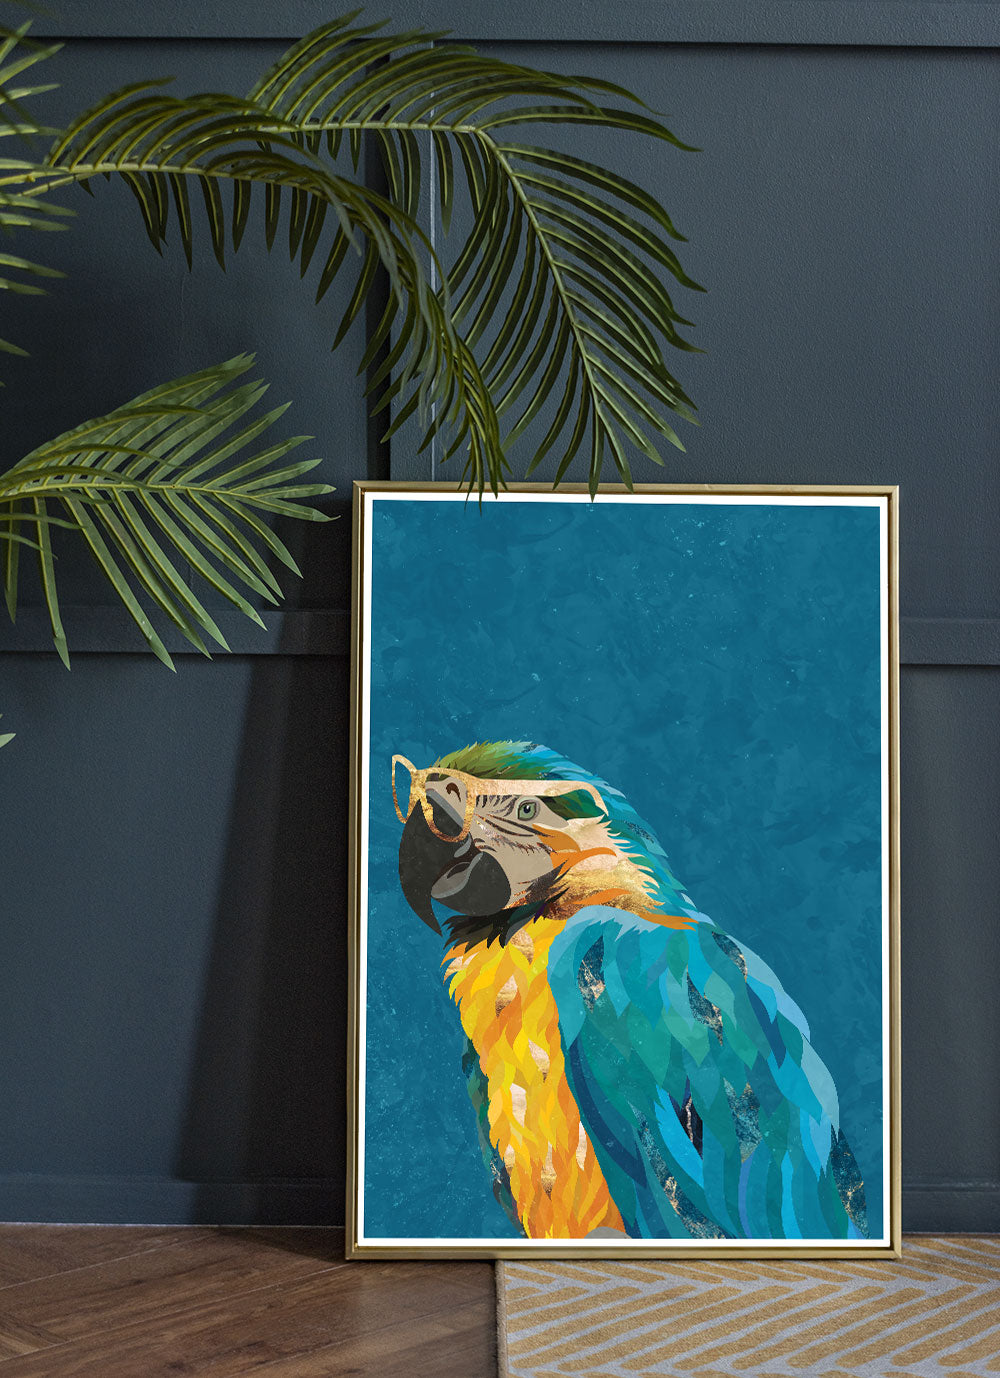 Funky Parrot Art Print by Sarah Manovski in a eclectic room with posh panels and house plant